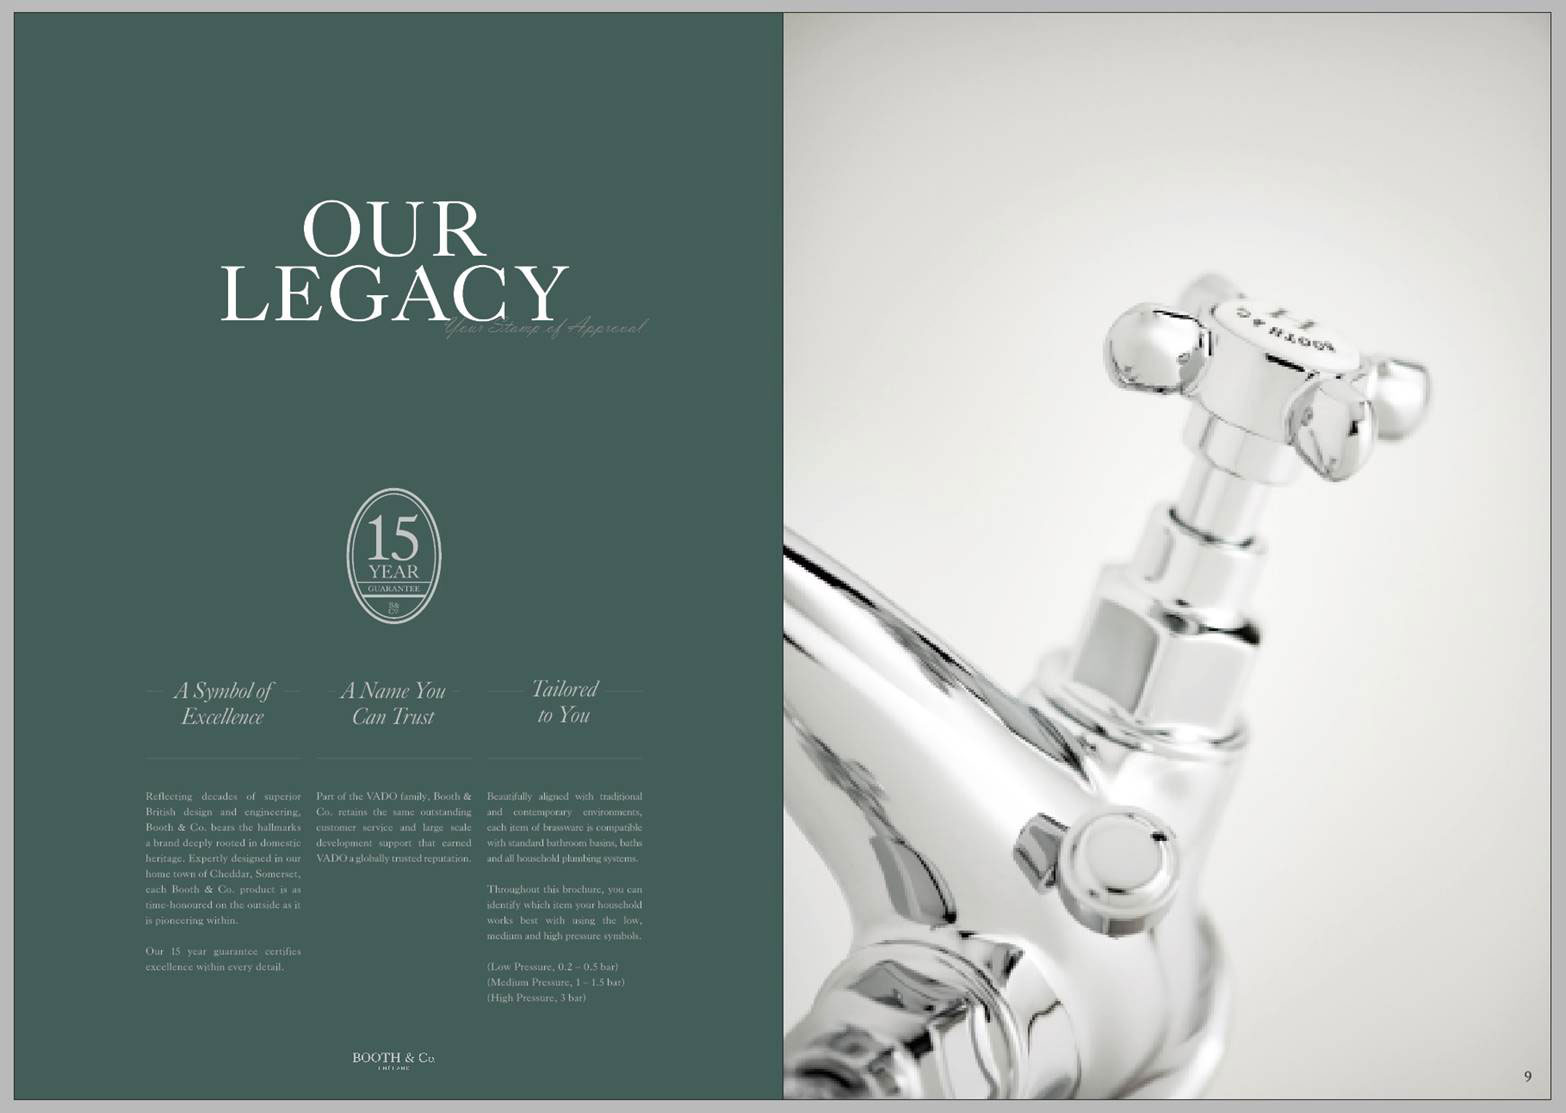 Brochure design layout showing image placement